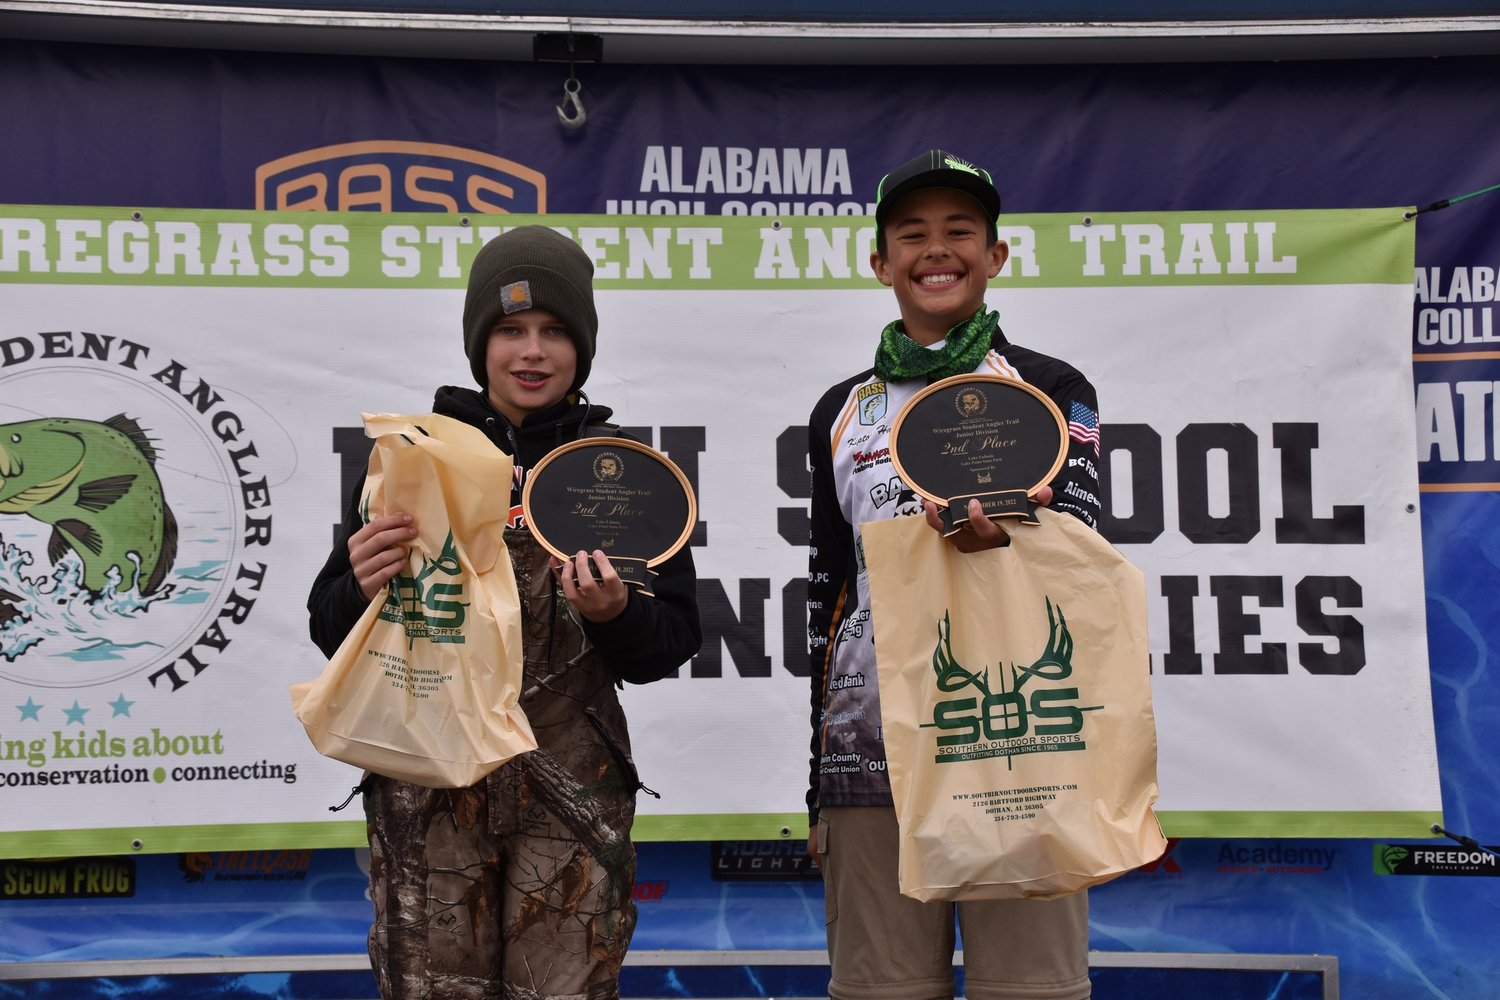 Kipton Hall and Wyatt Parker took second place in the individual standings of the Nov. 19 tournament on Lake Eufaula in the season finale of the Wiregrass Student Angler Trail. Their five fish weighed in at 7.29 total pounds.